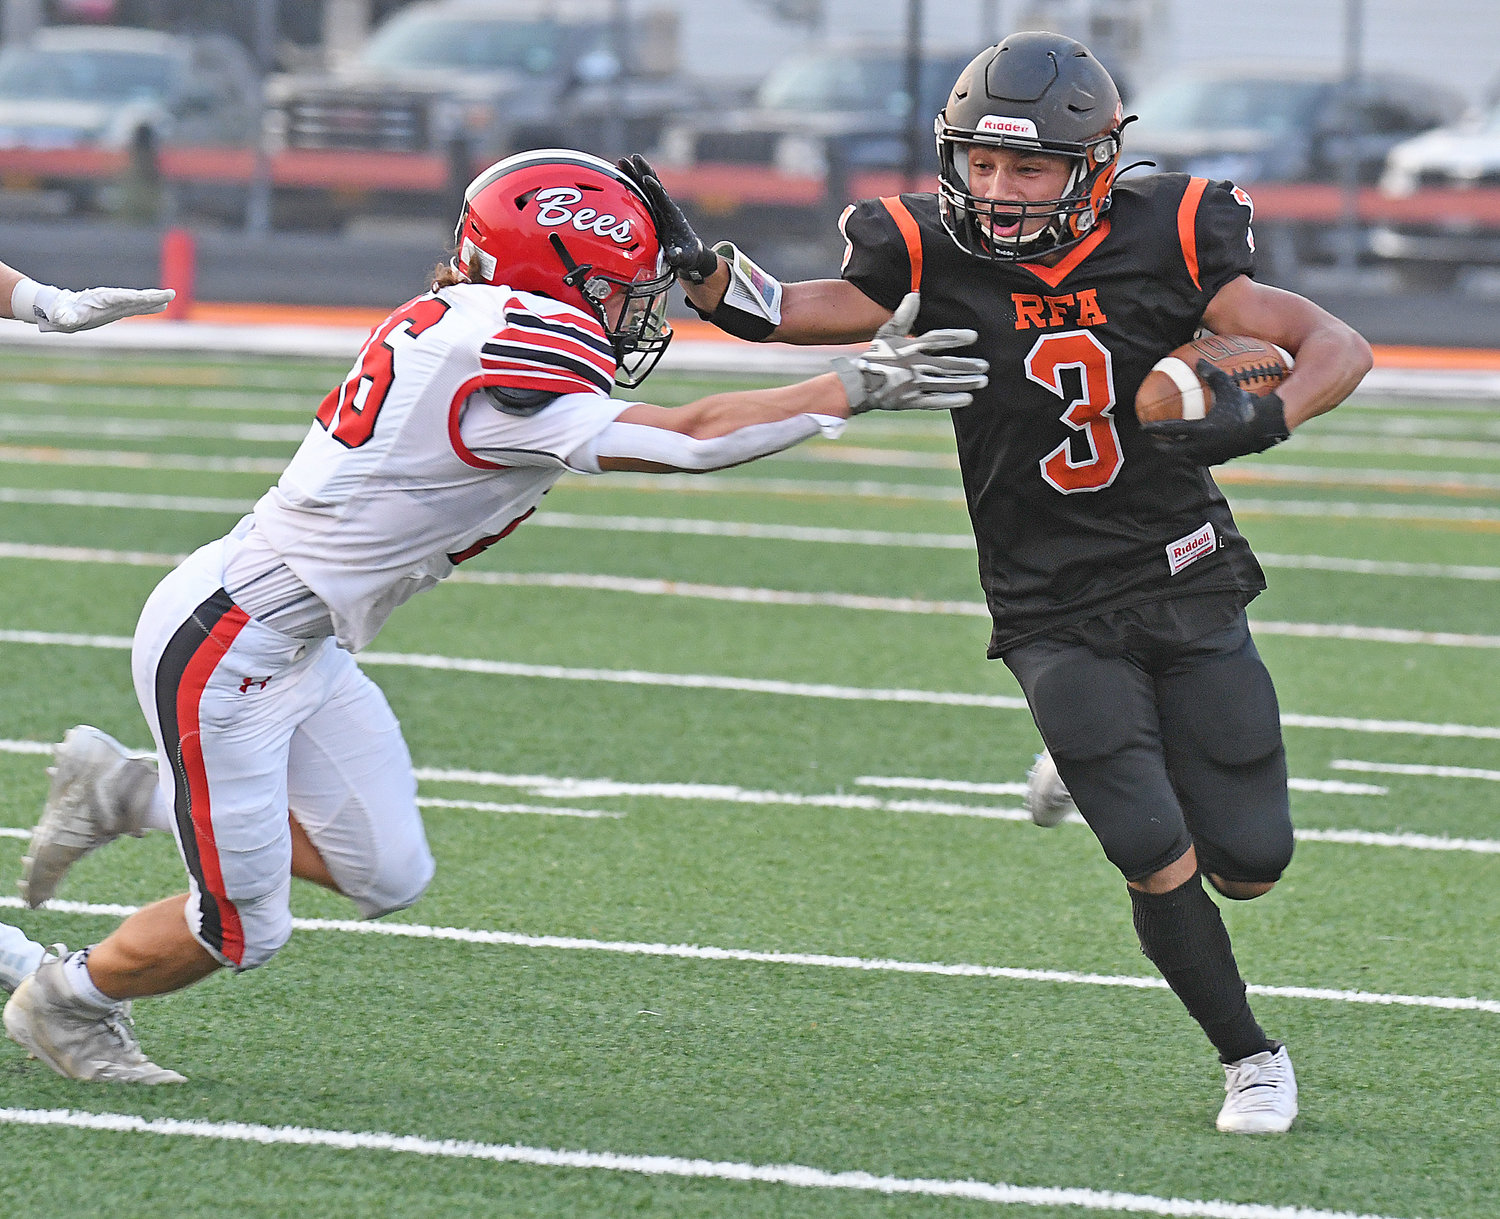 Lebron Bowman stiff arms Baldwinsville's Kaleb Paul in the first quarter of Friday night's game at RFA Stadium. Bowman scored on a 66-yard throw-and-catch in the second half but RFA lost 55-13.